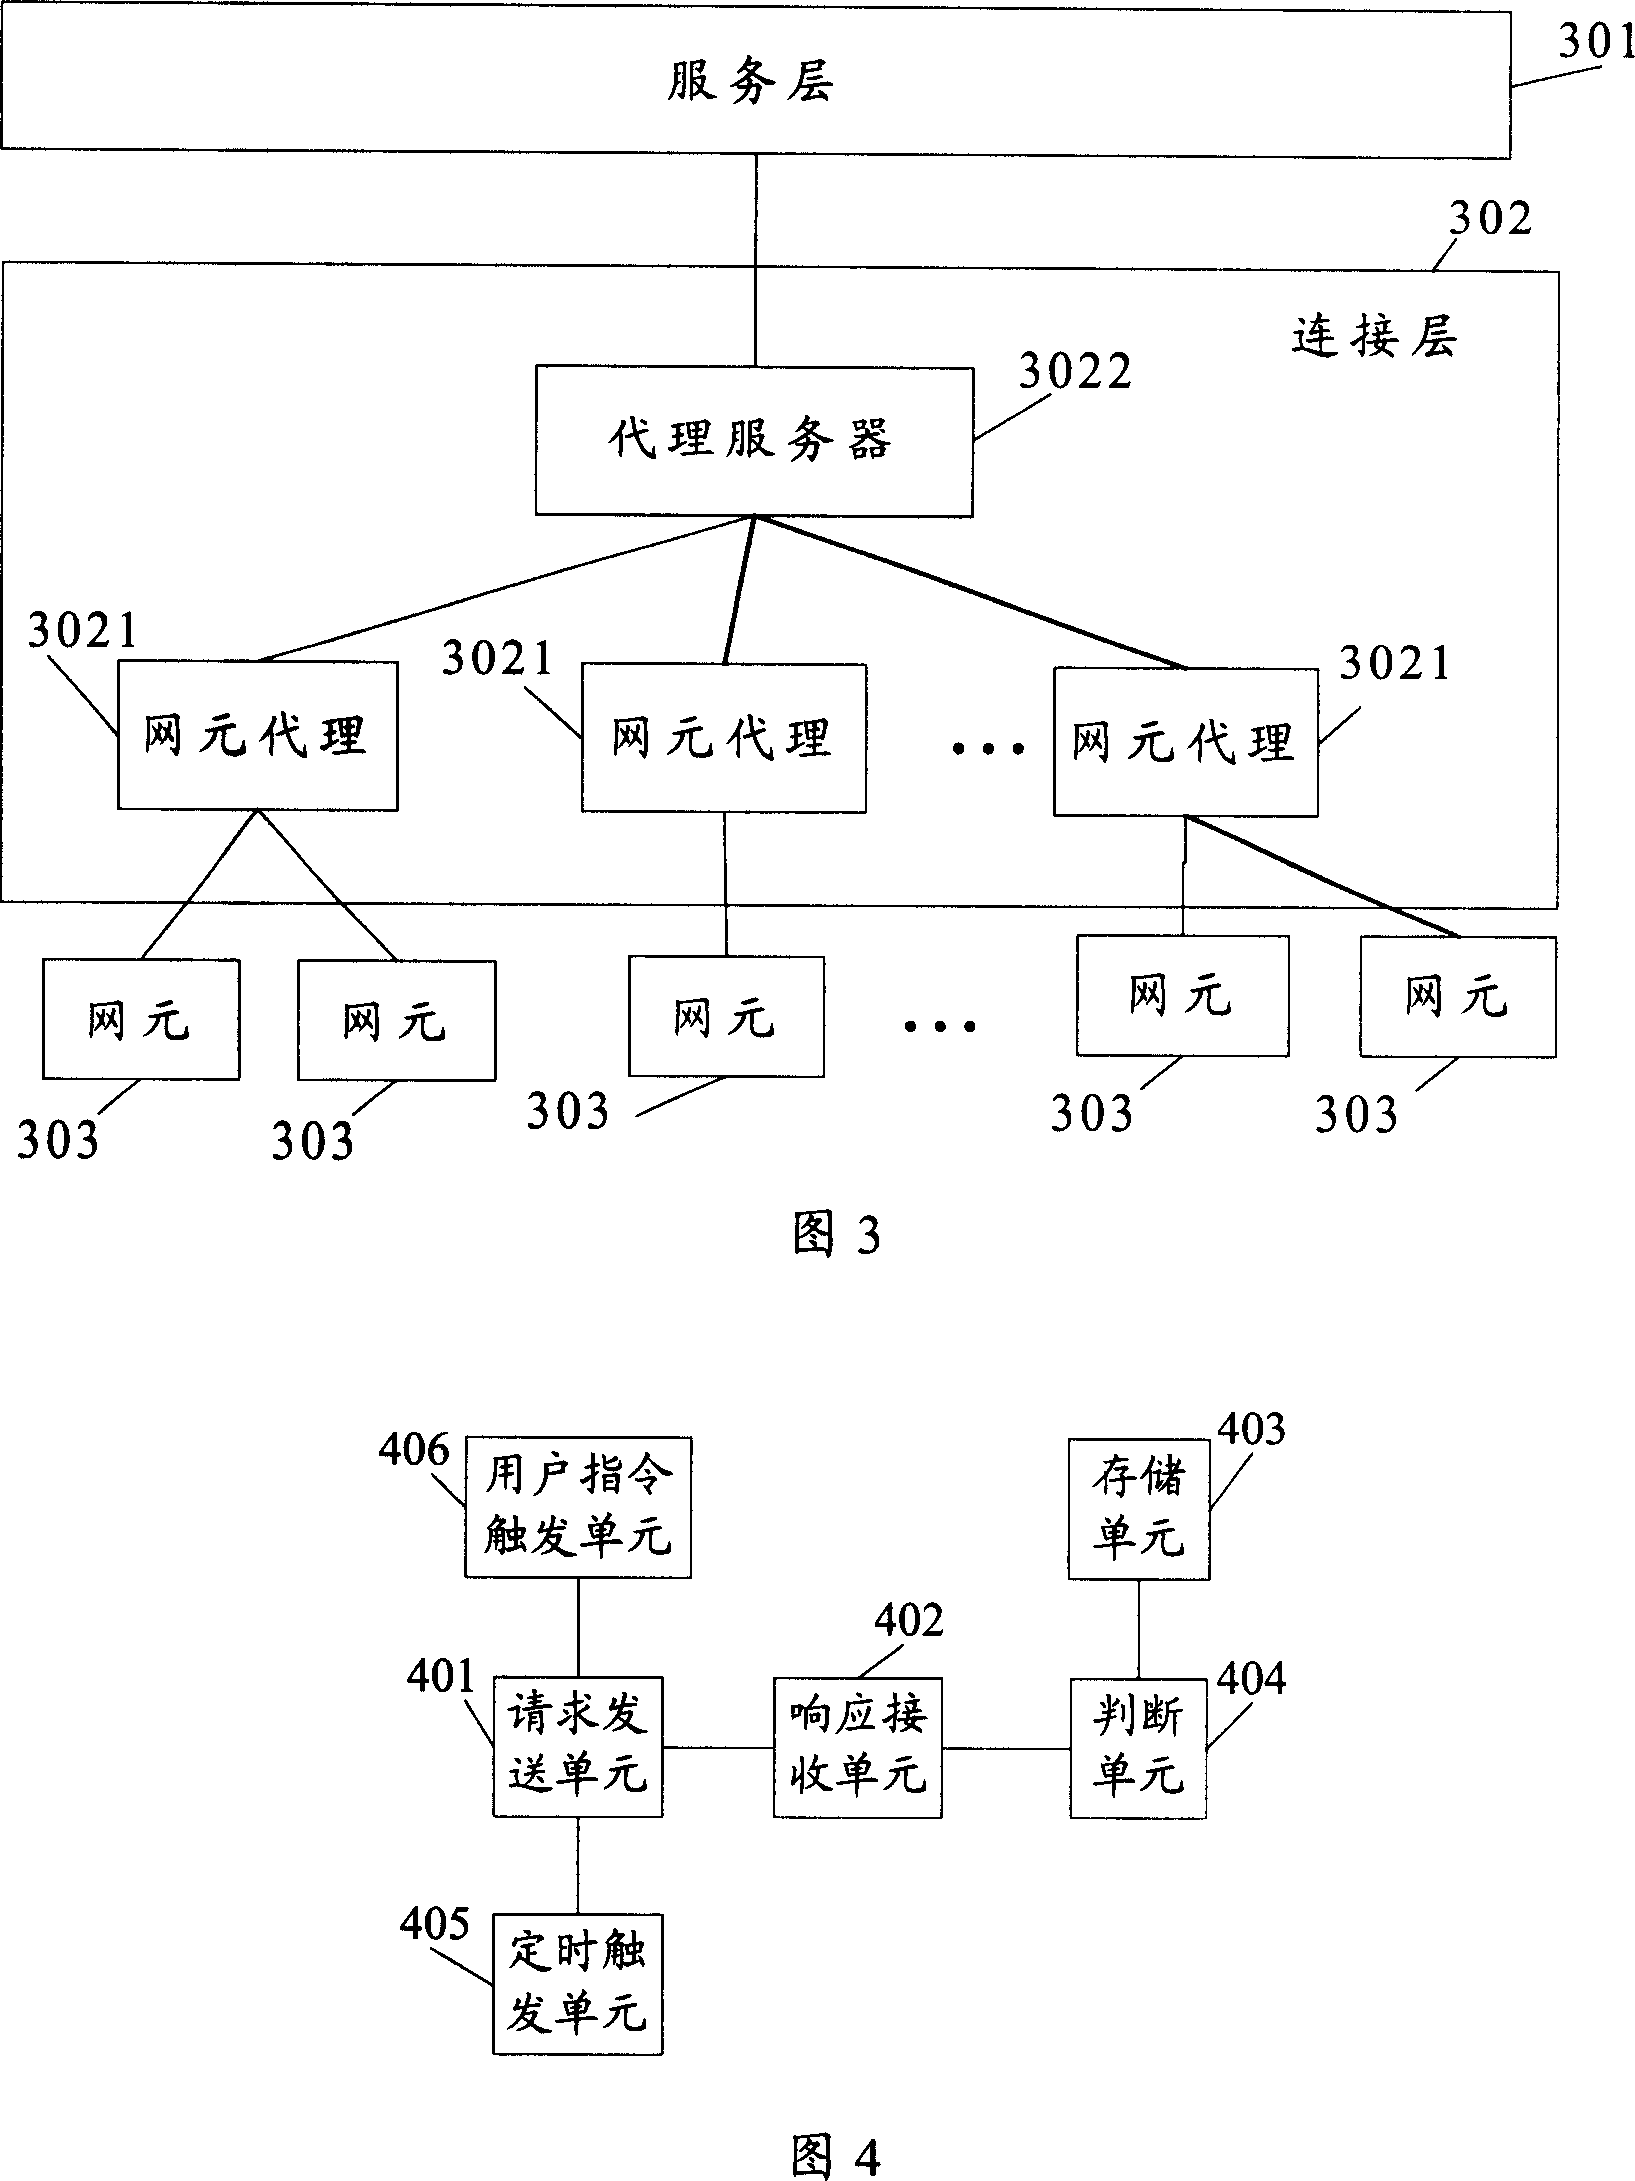 Network element state detecting method and network management equipment